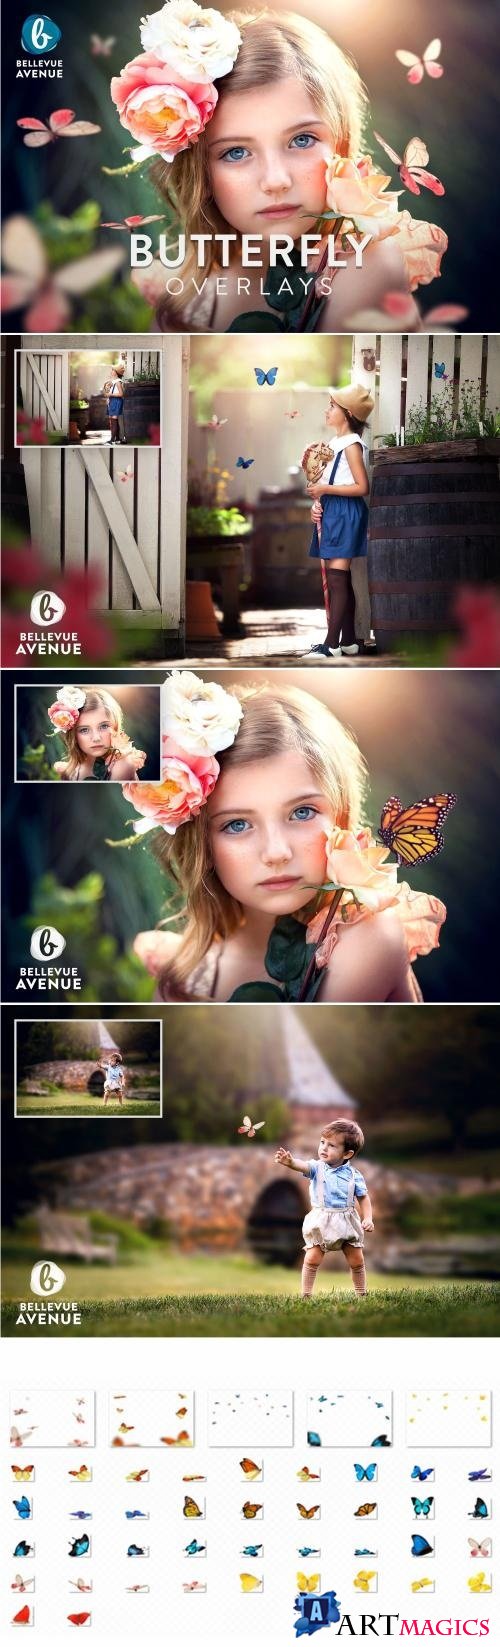 Butterfly Overlays (Real) - 2294970